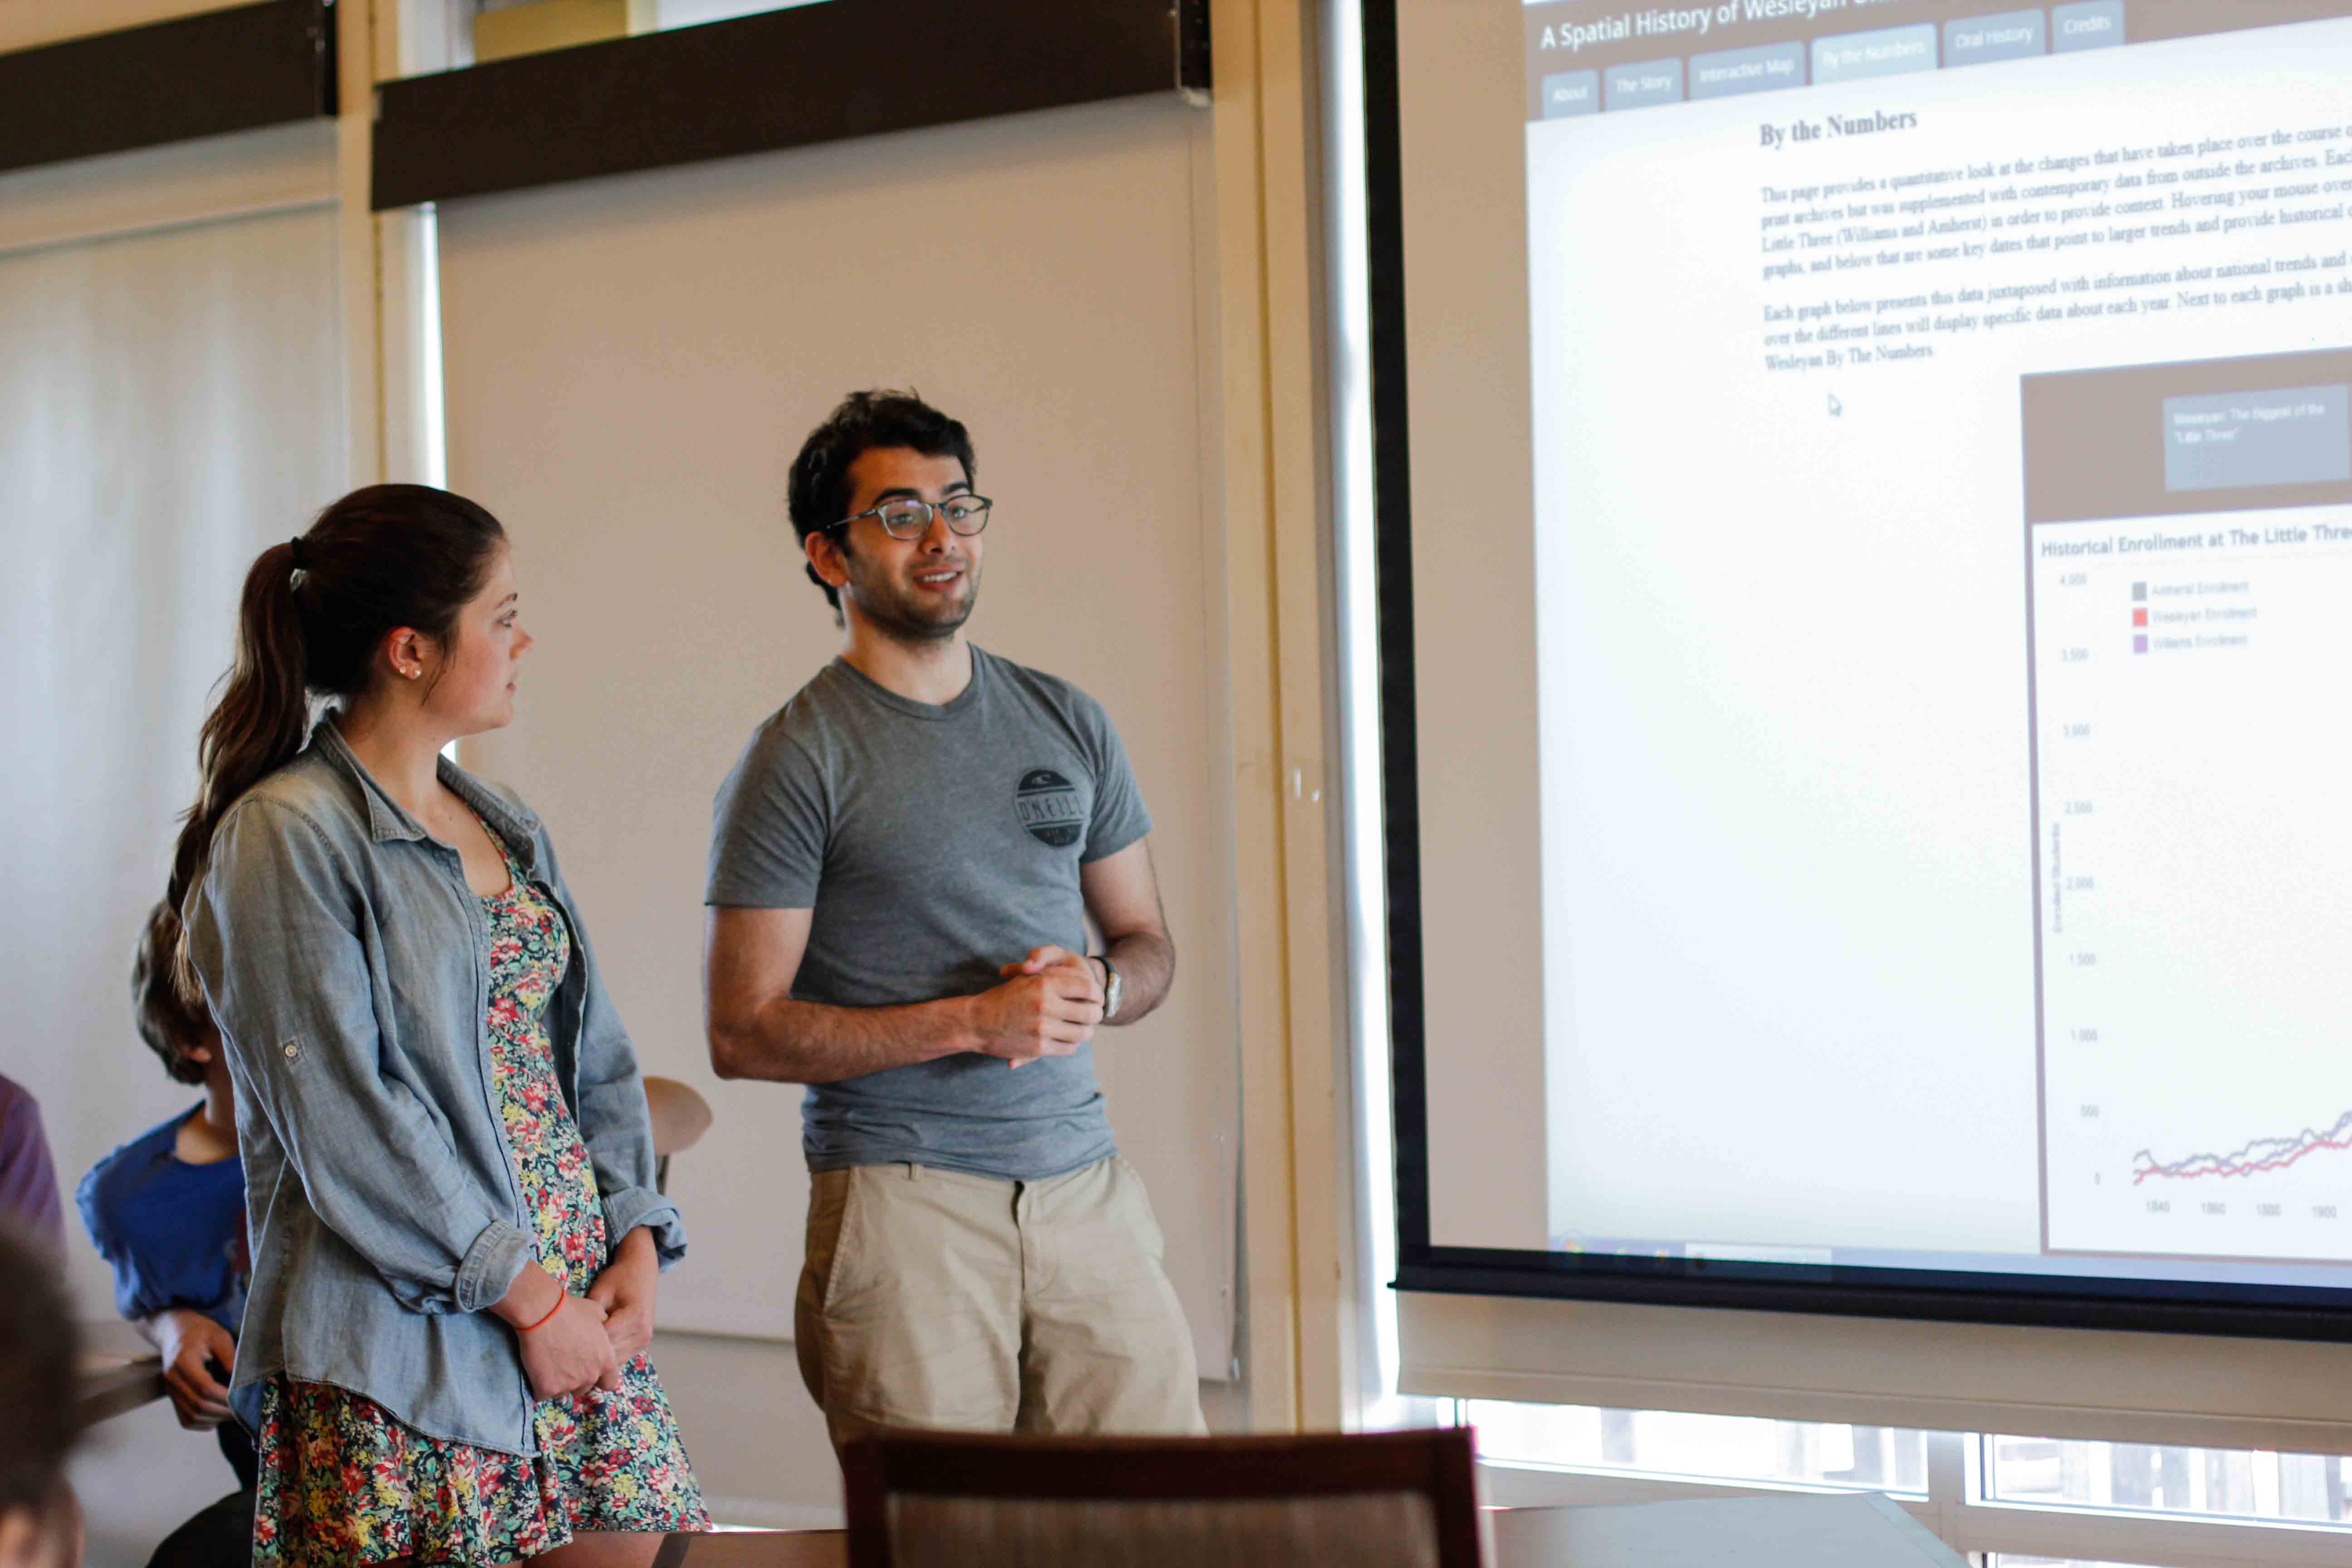 Alex Heyison '15 and Annie Ferreira '17 explain the "By the Numbers" tab of the project.